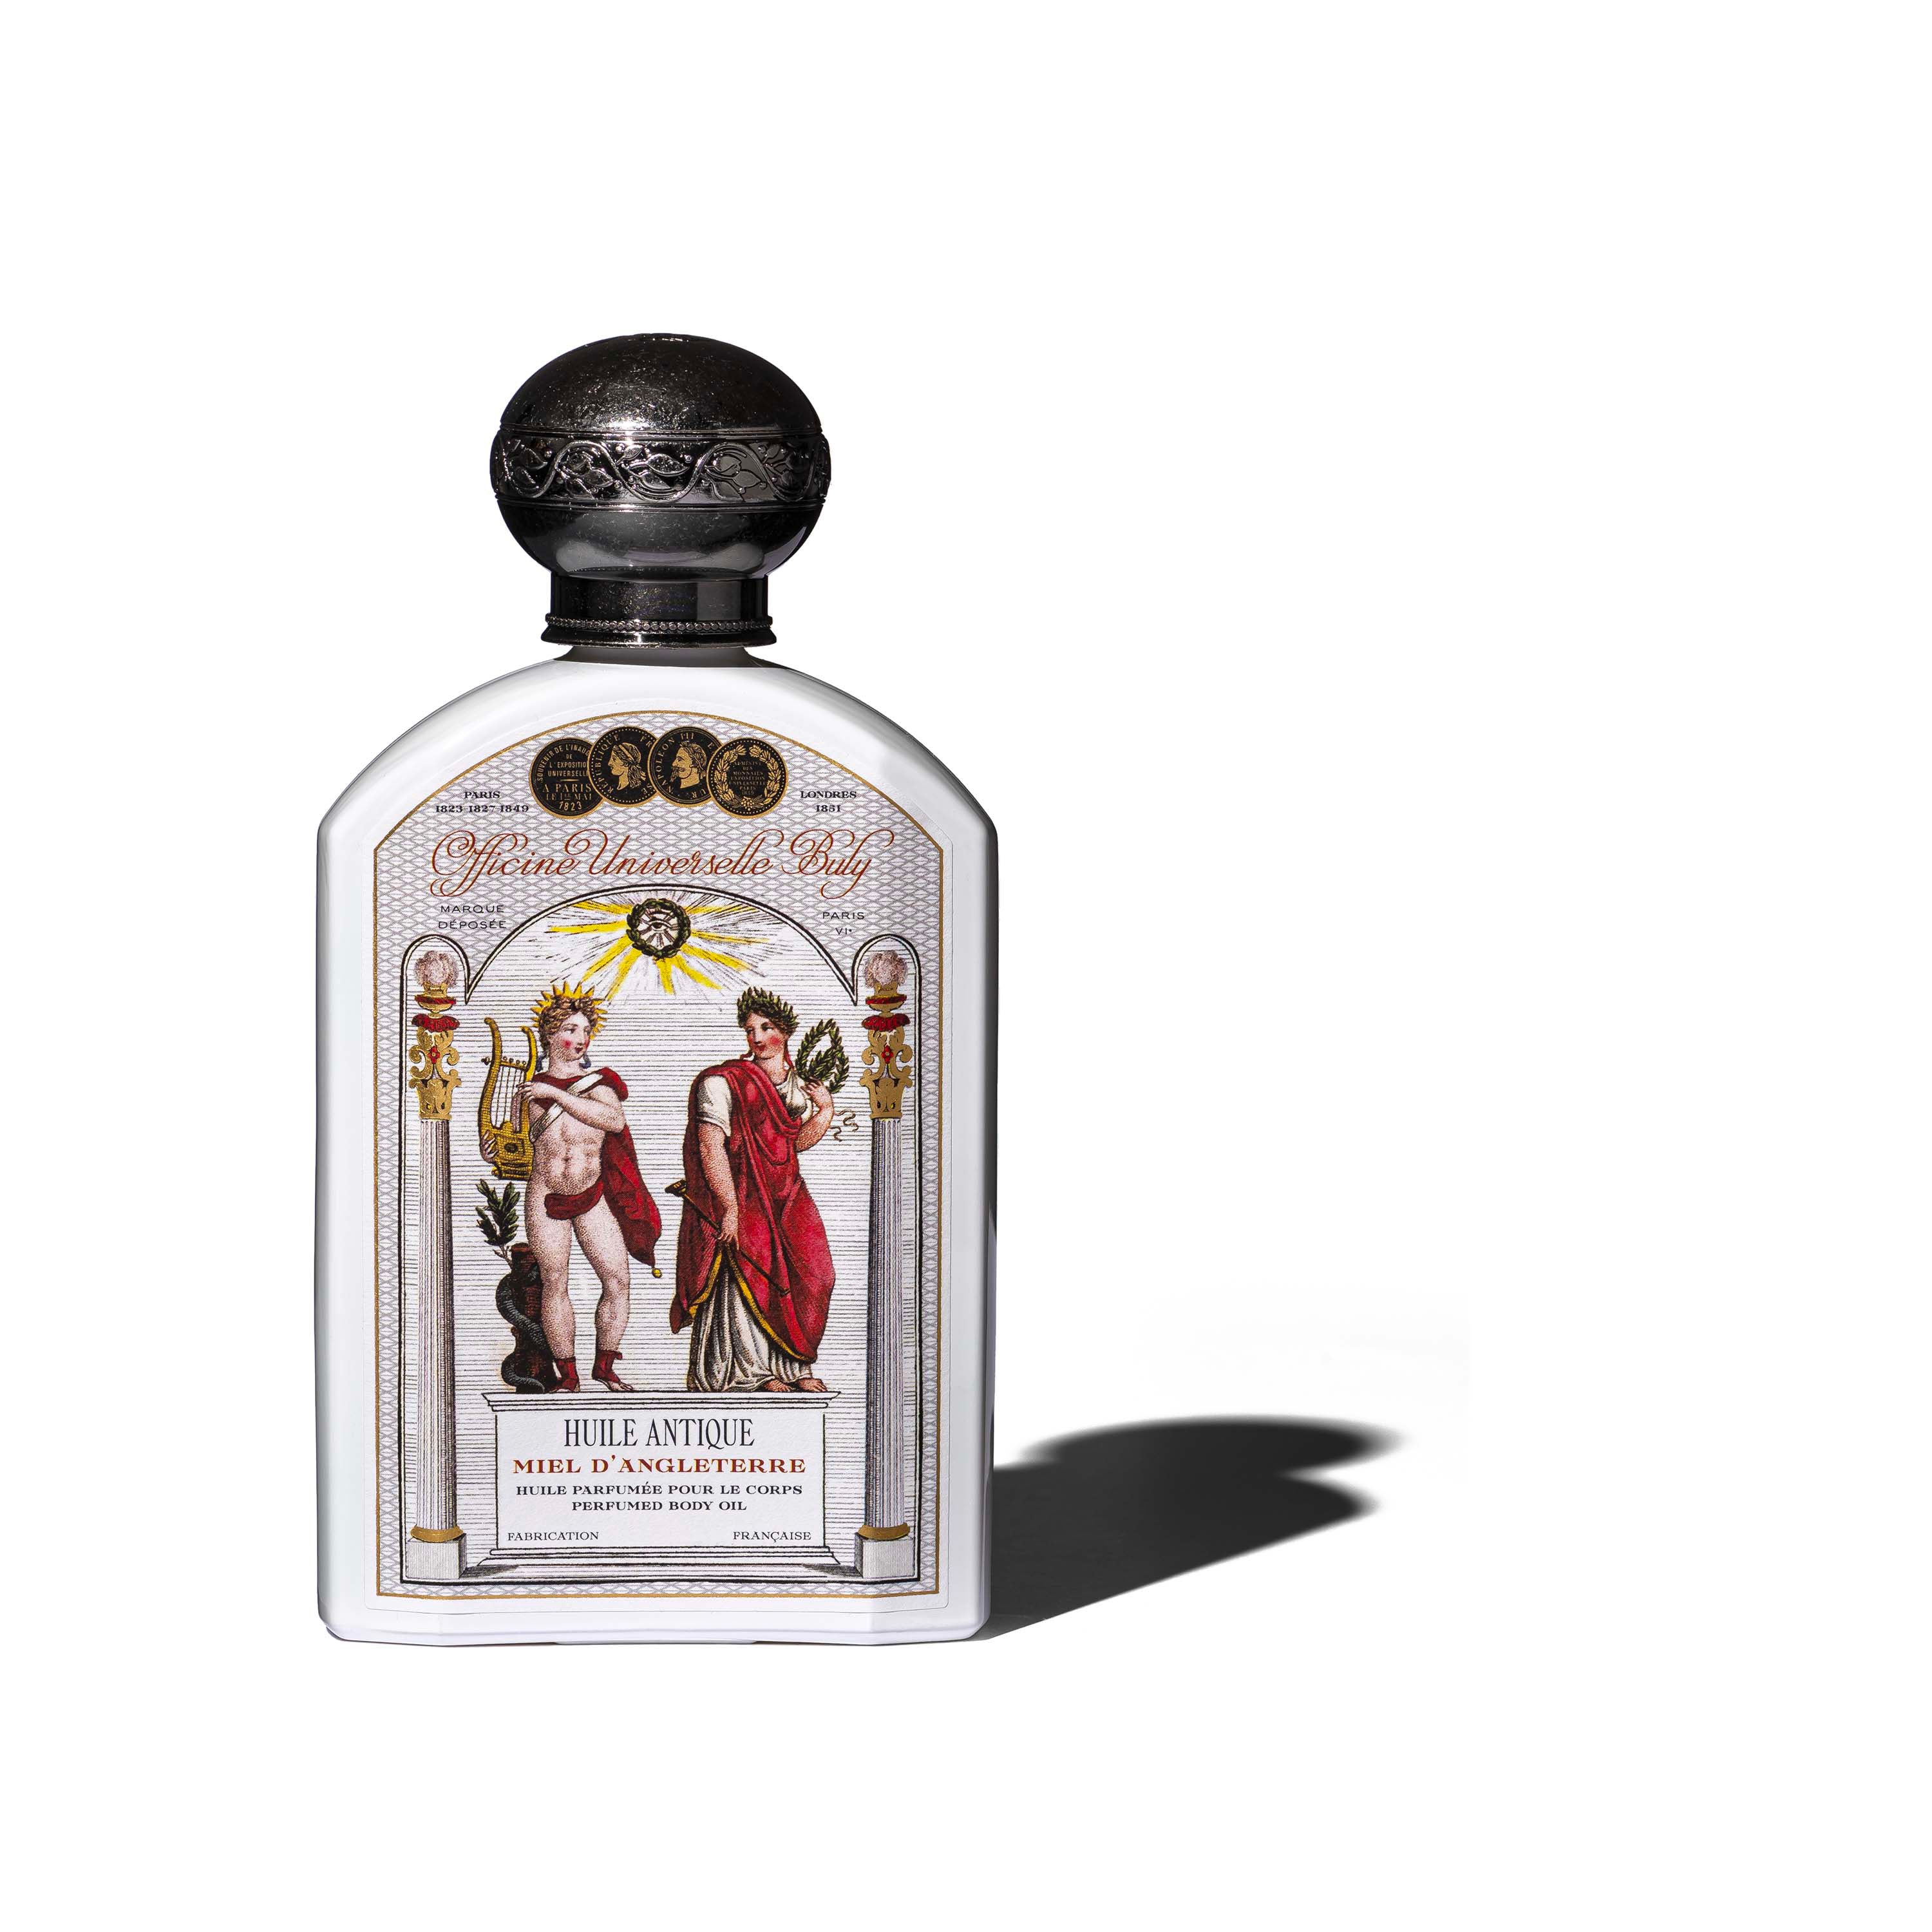 PERFUMING – Officine Universelle Buly